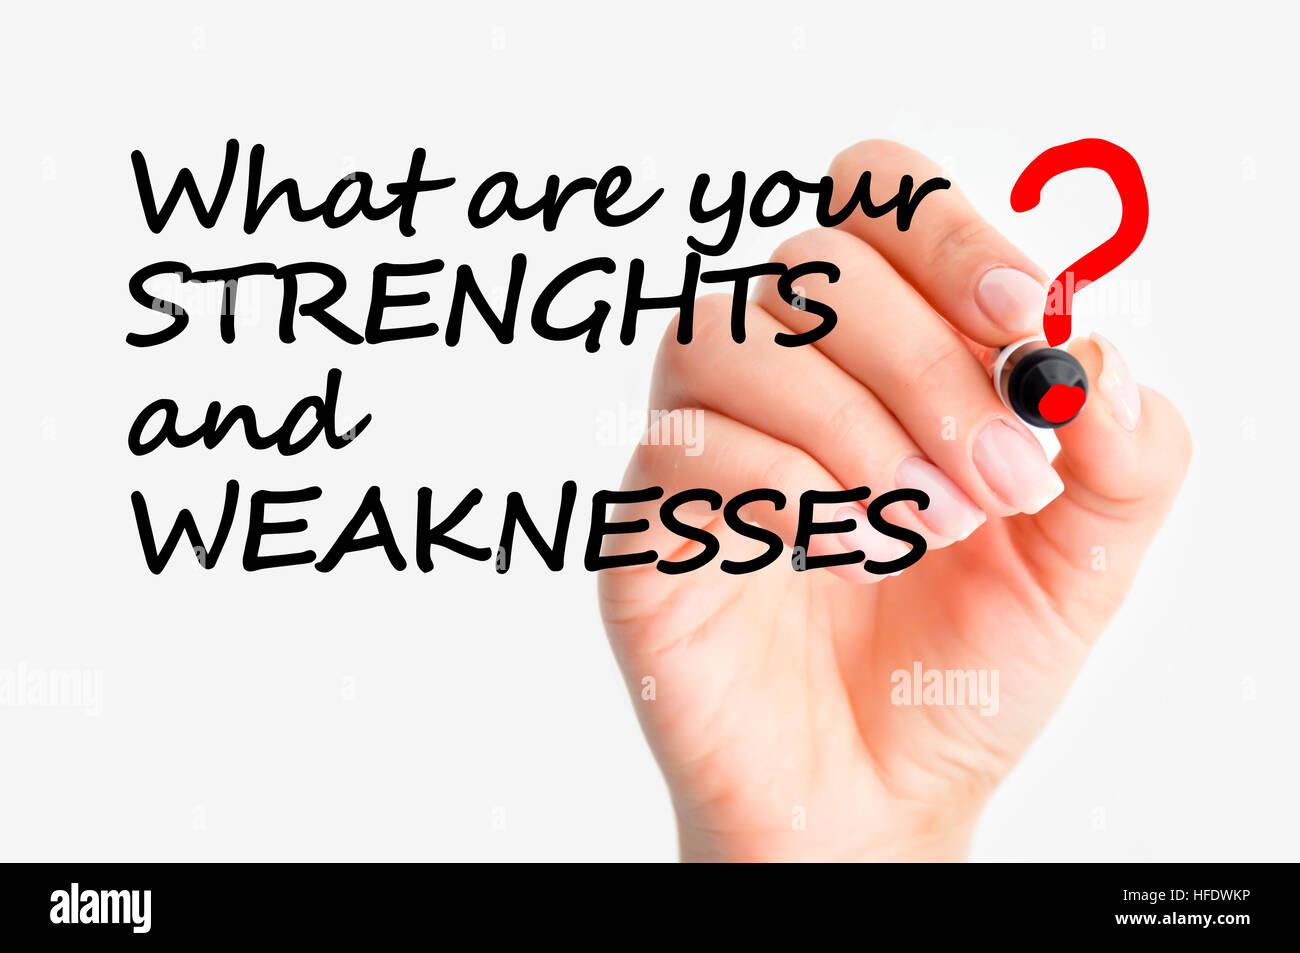 What are your strengths and weaknesses interview question Stock Photo